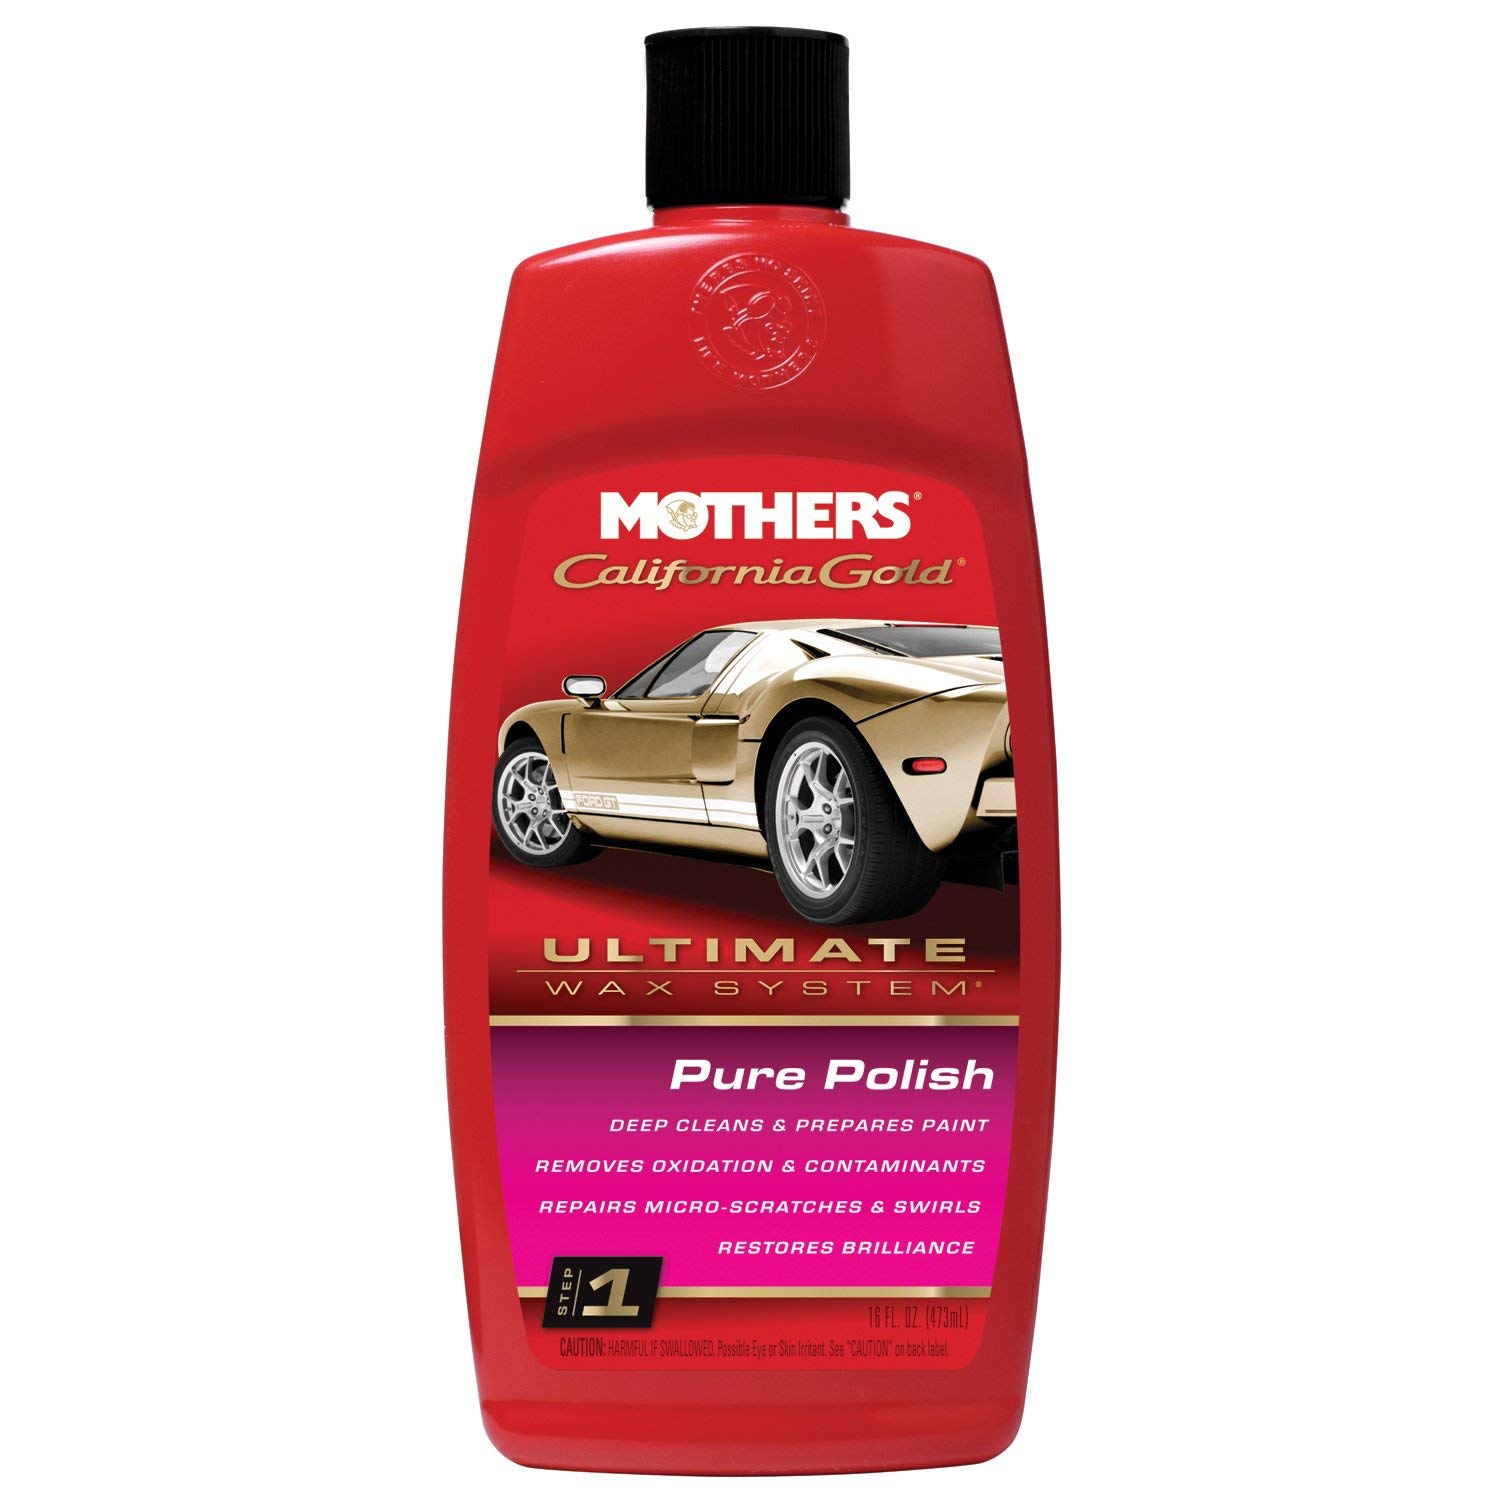 Pure Polish Glaze Ultimate Wax System California Gold Mothers